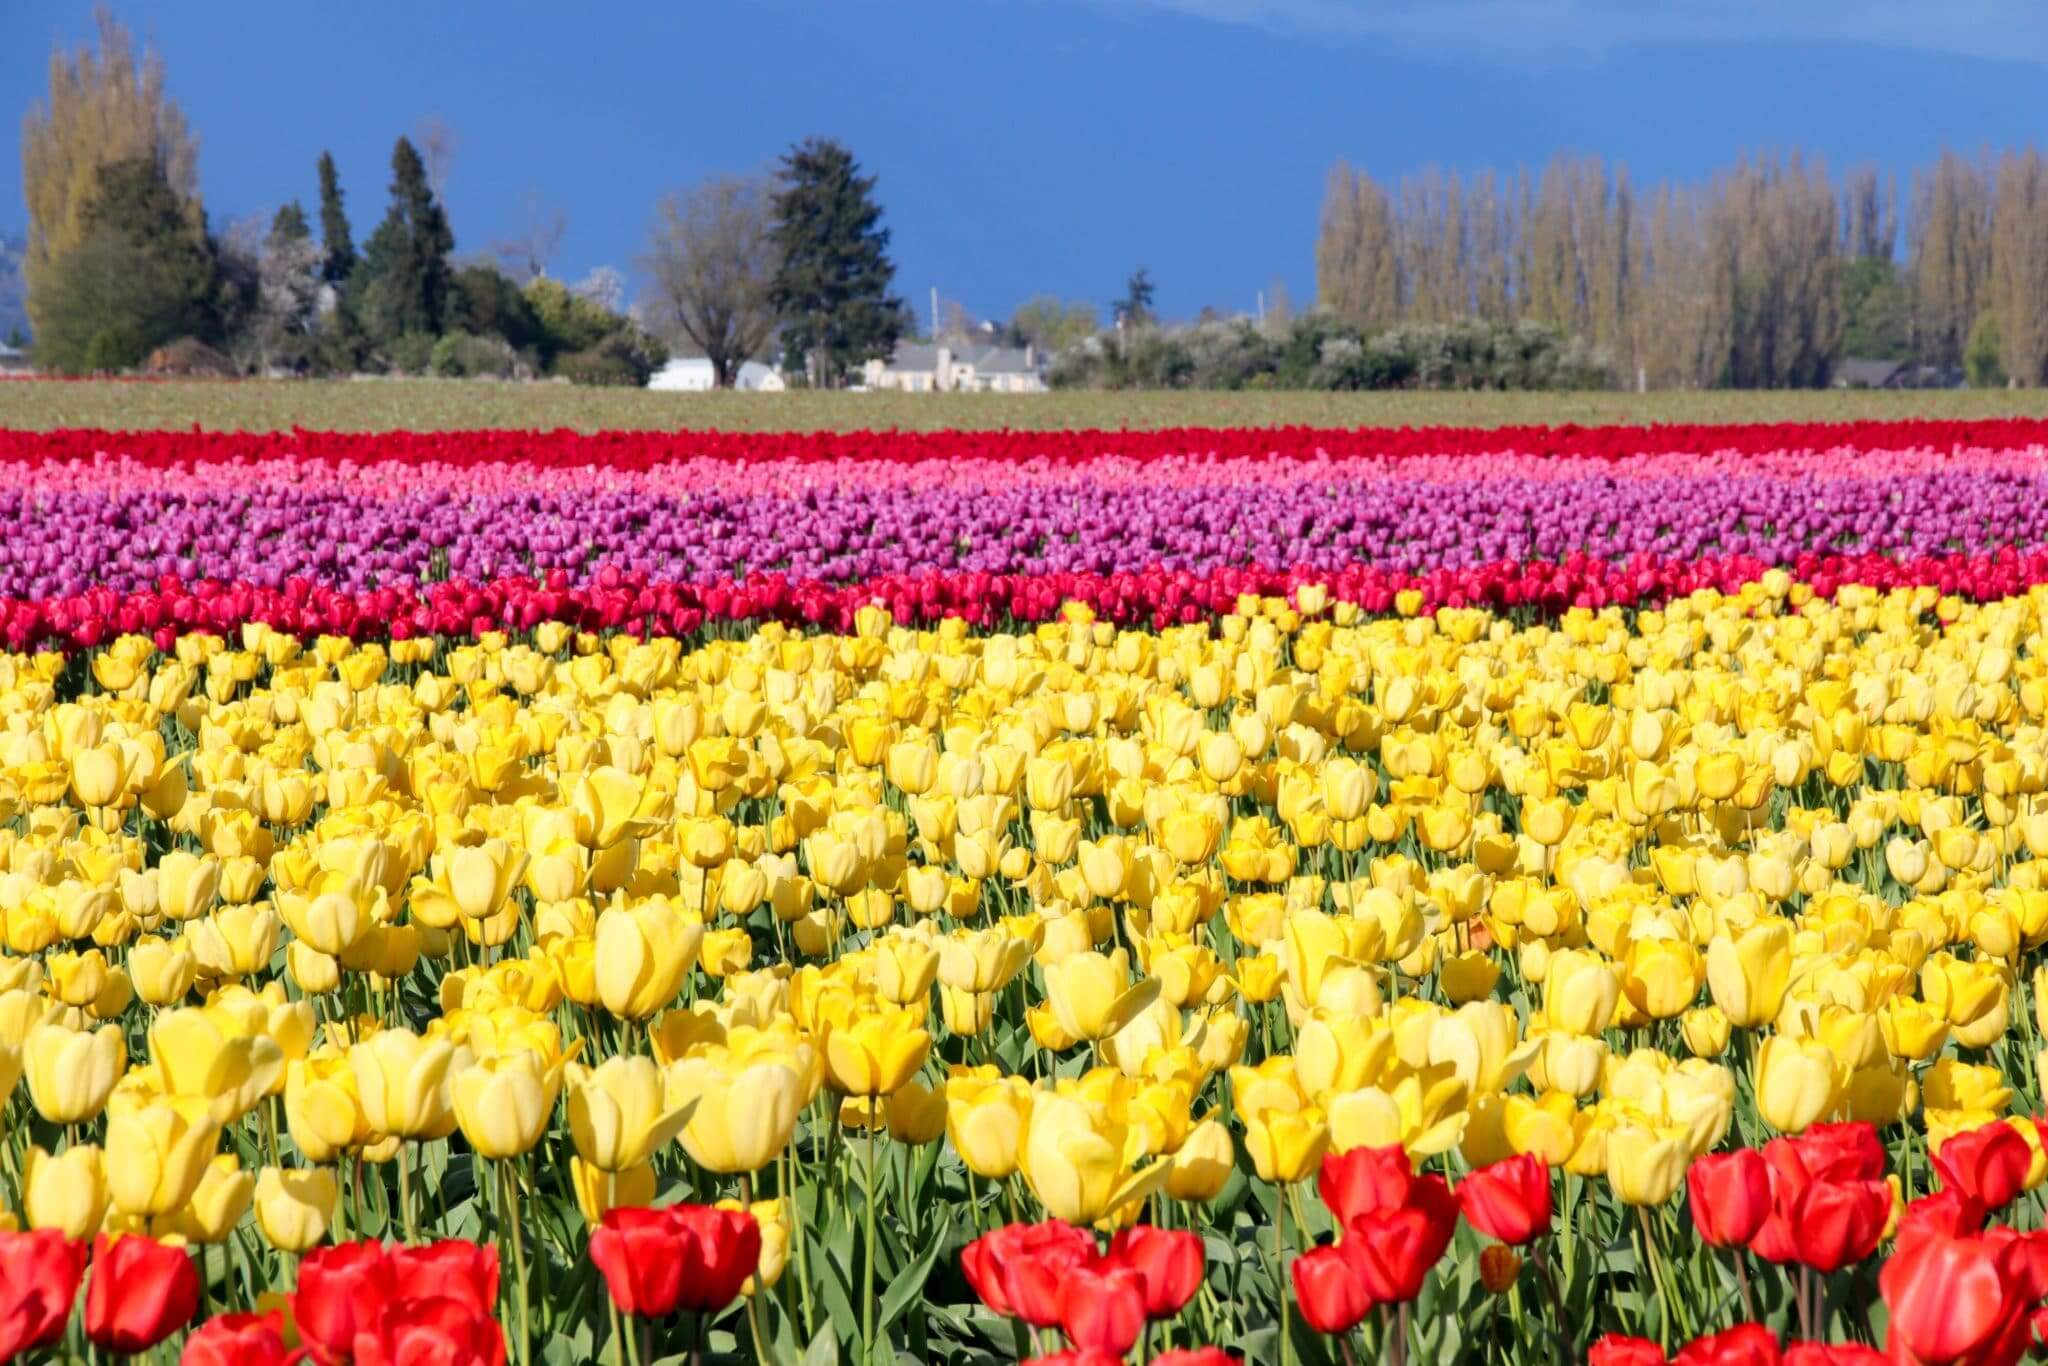 Different colored flowers in rows